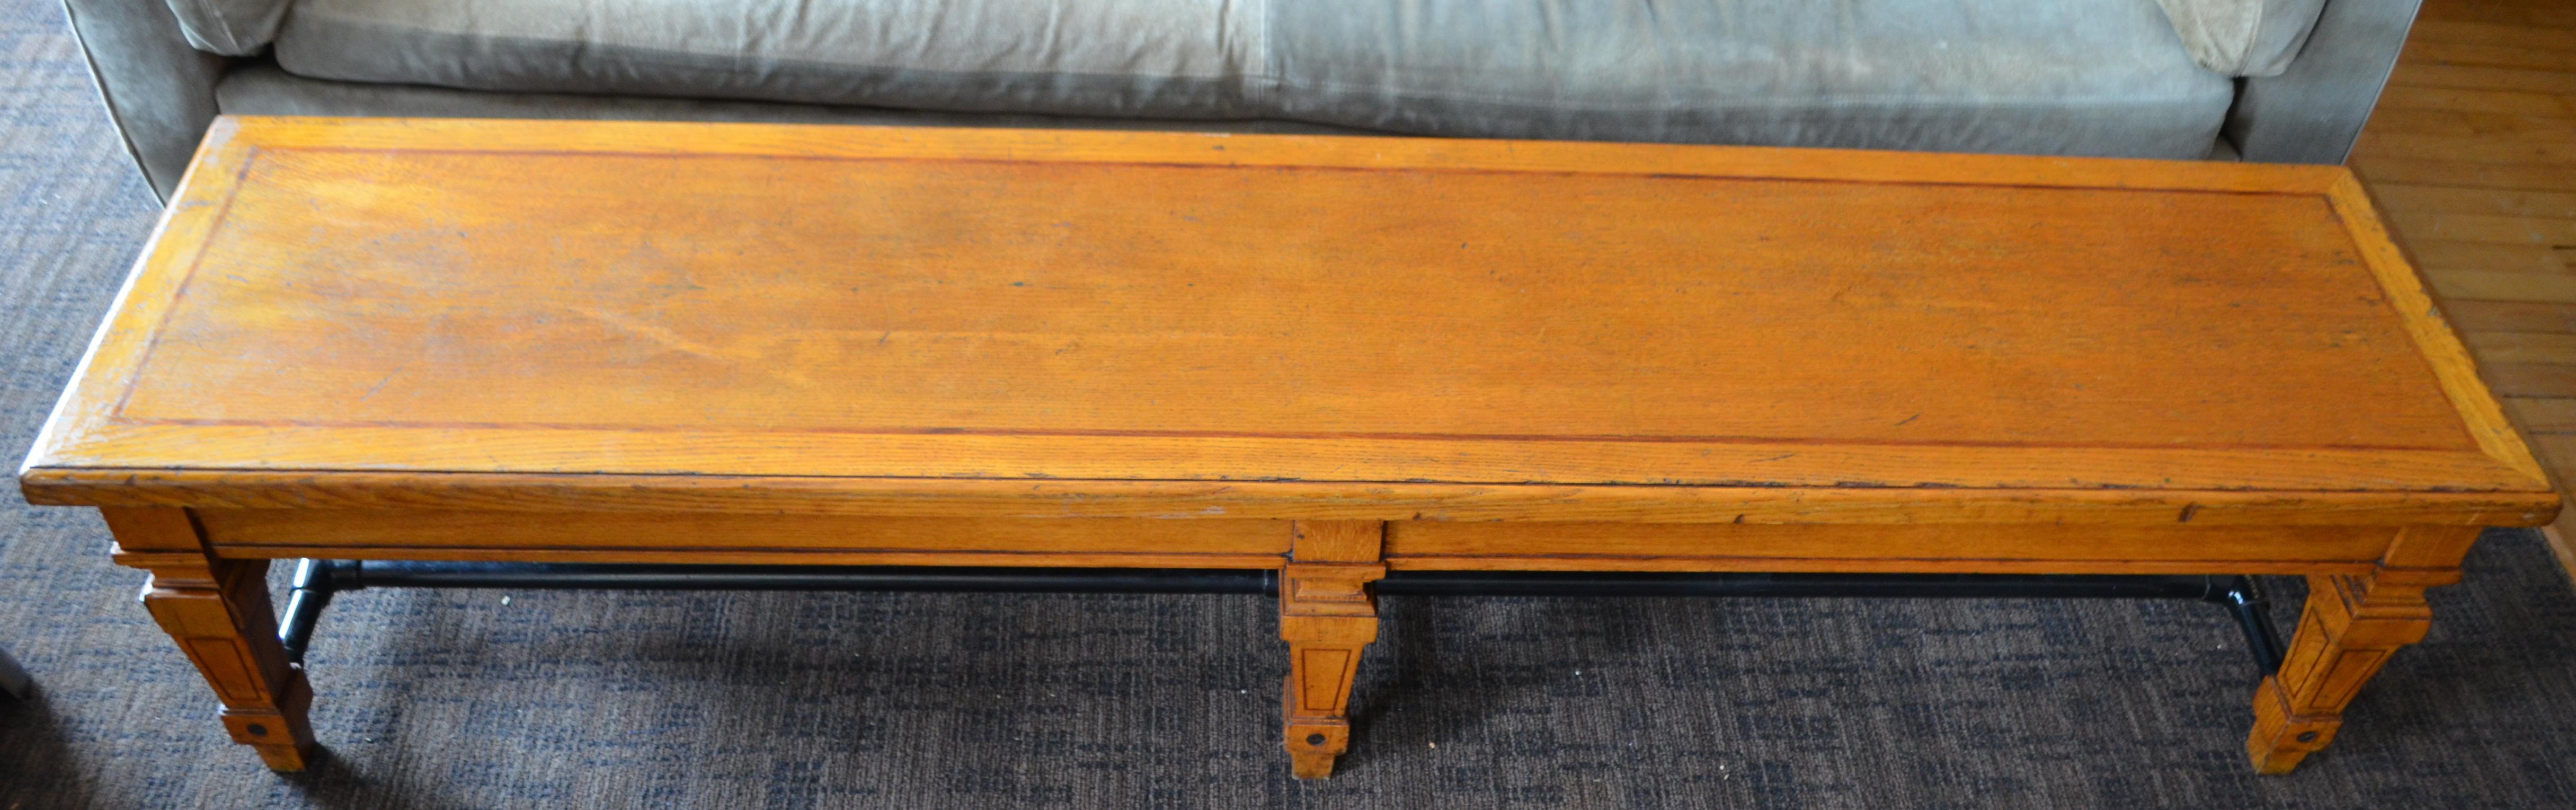 Bench from Parisian Bank, 1900s, Carved Legs and Oak Top with Steel Bar Supports For Sale 6